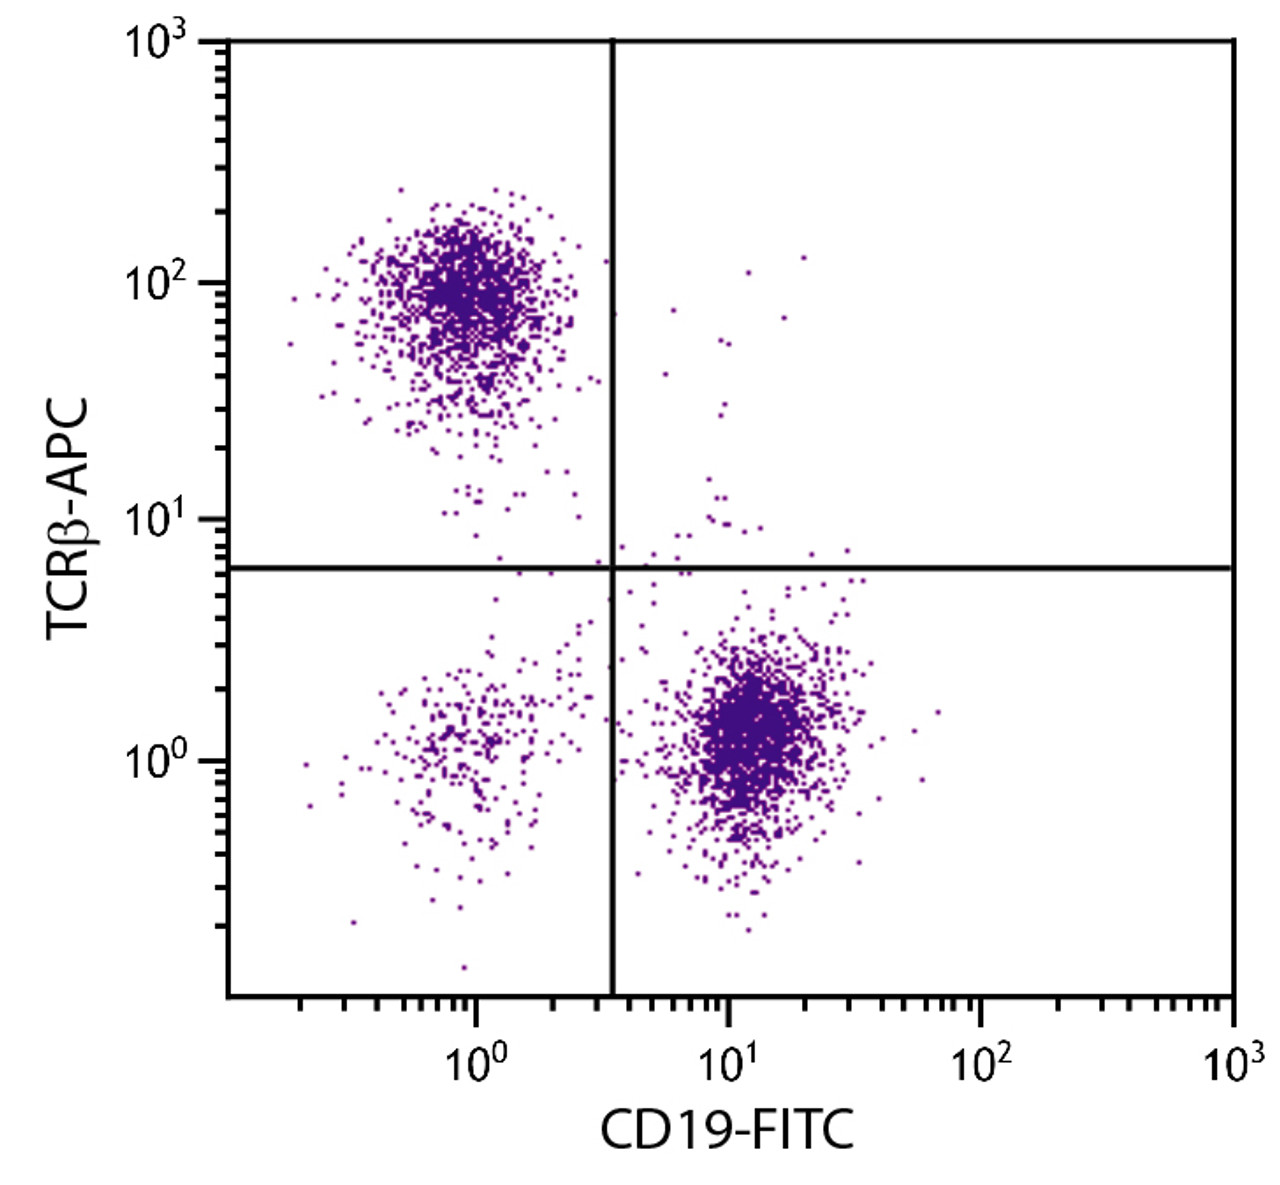 BALB/c mouse splenocytes were stained with Hamster Anti-Mouse TCR?-APC (Cat. No. 98-902) and Rat Anti-Mouse CD19-FITC .